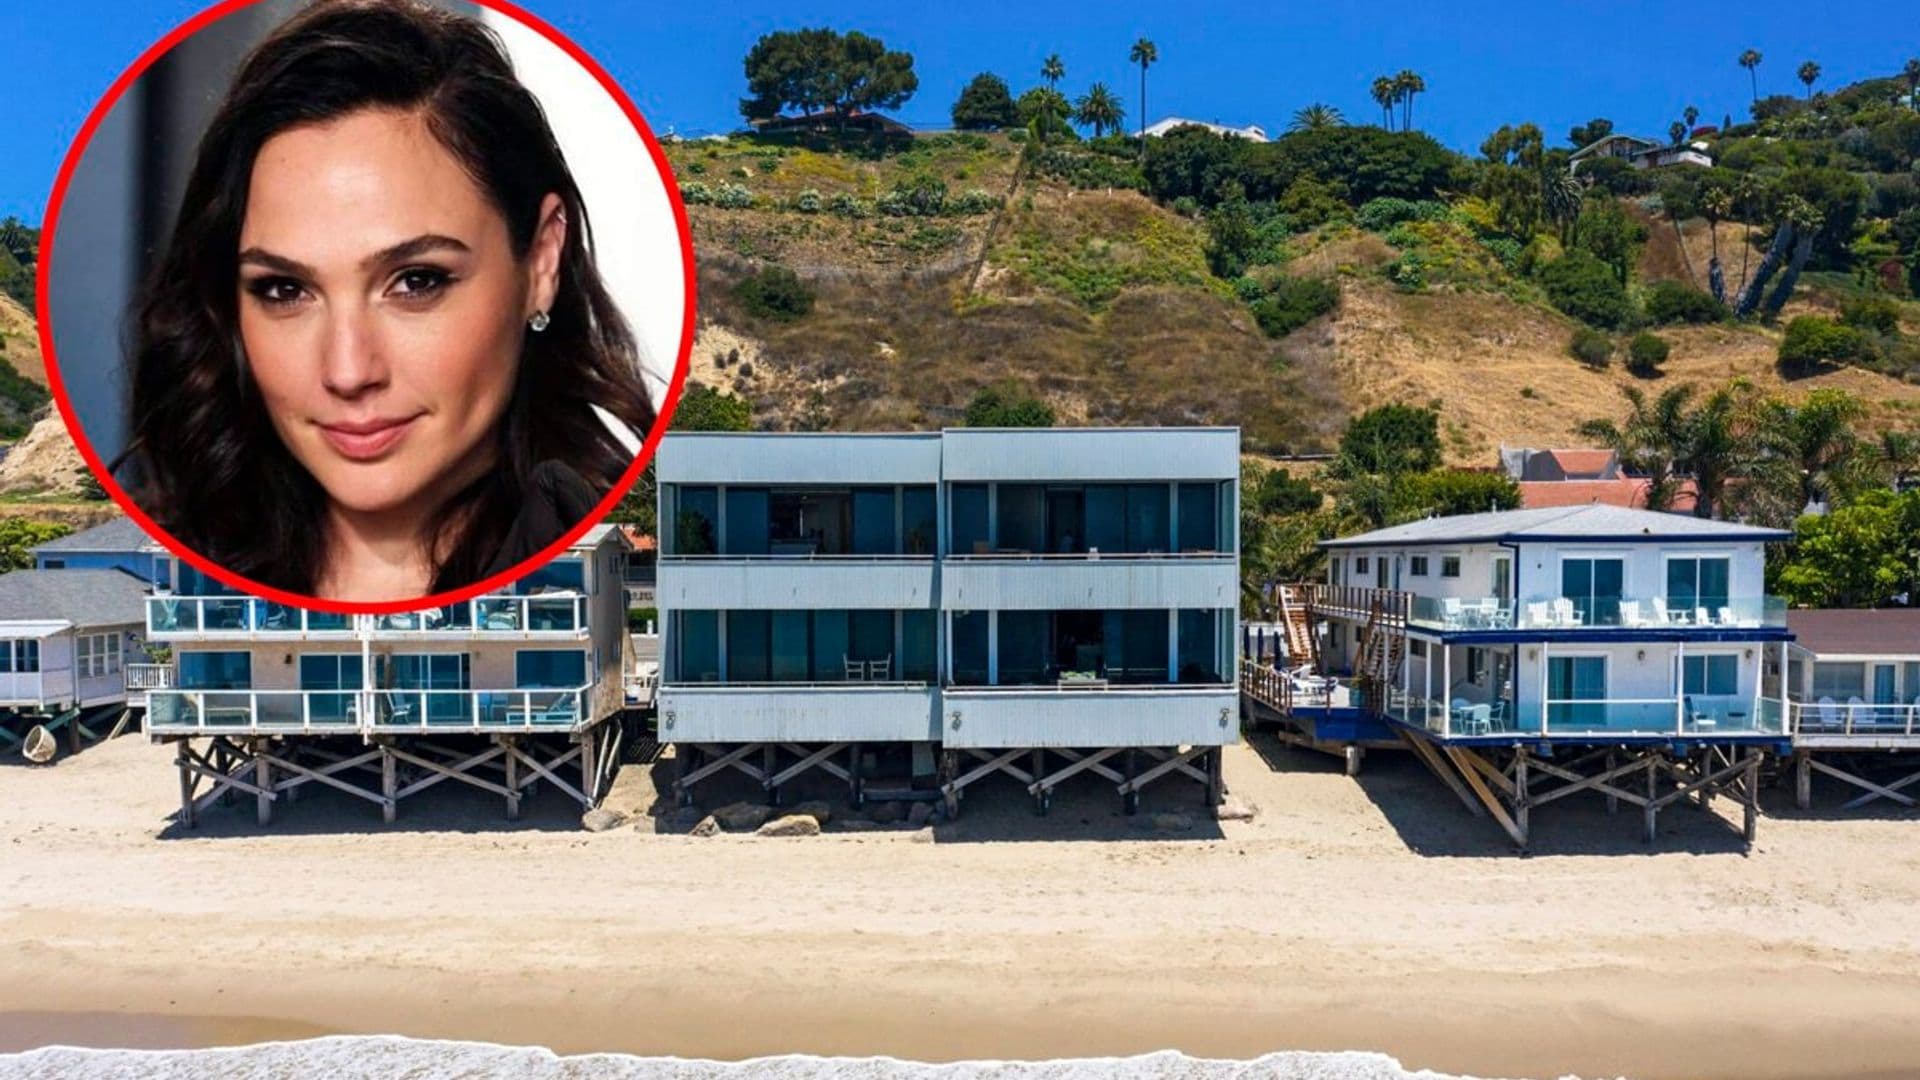 Gal Gadot topped off her 2020 by purchasing a new $5 million Malibu condo